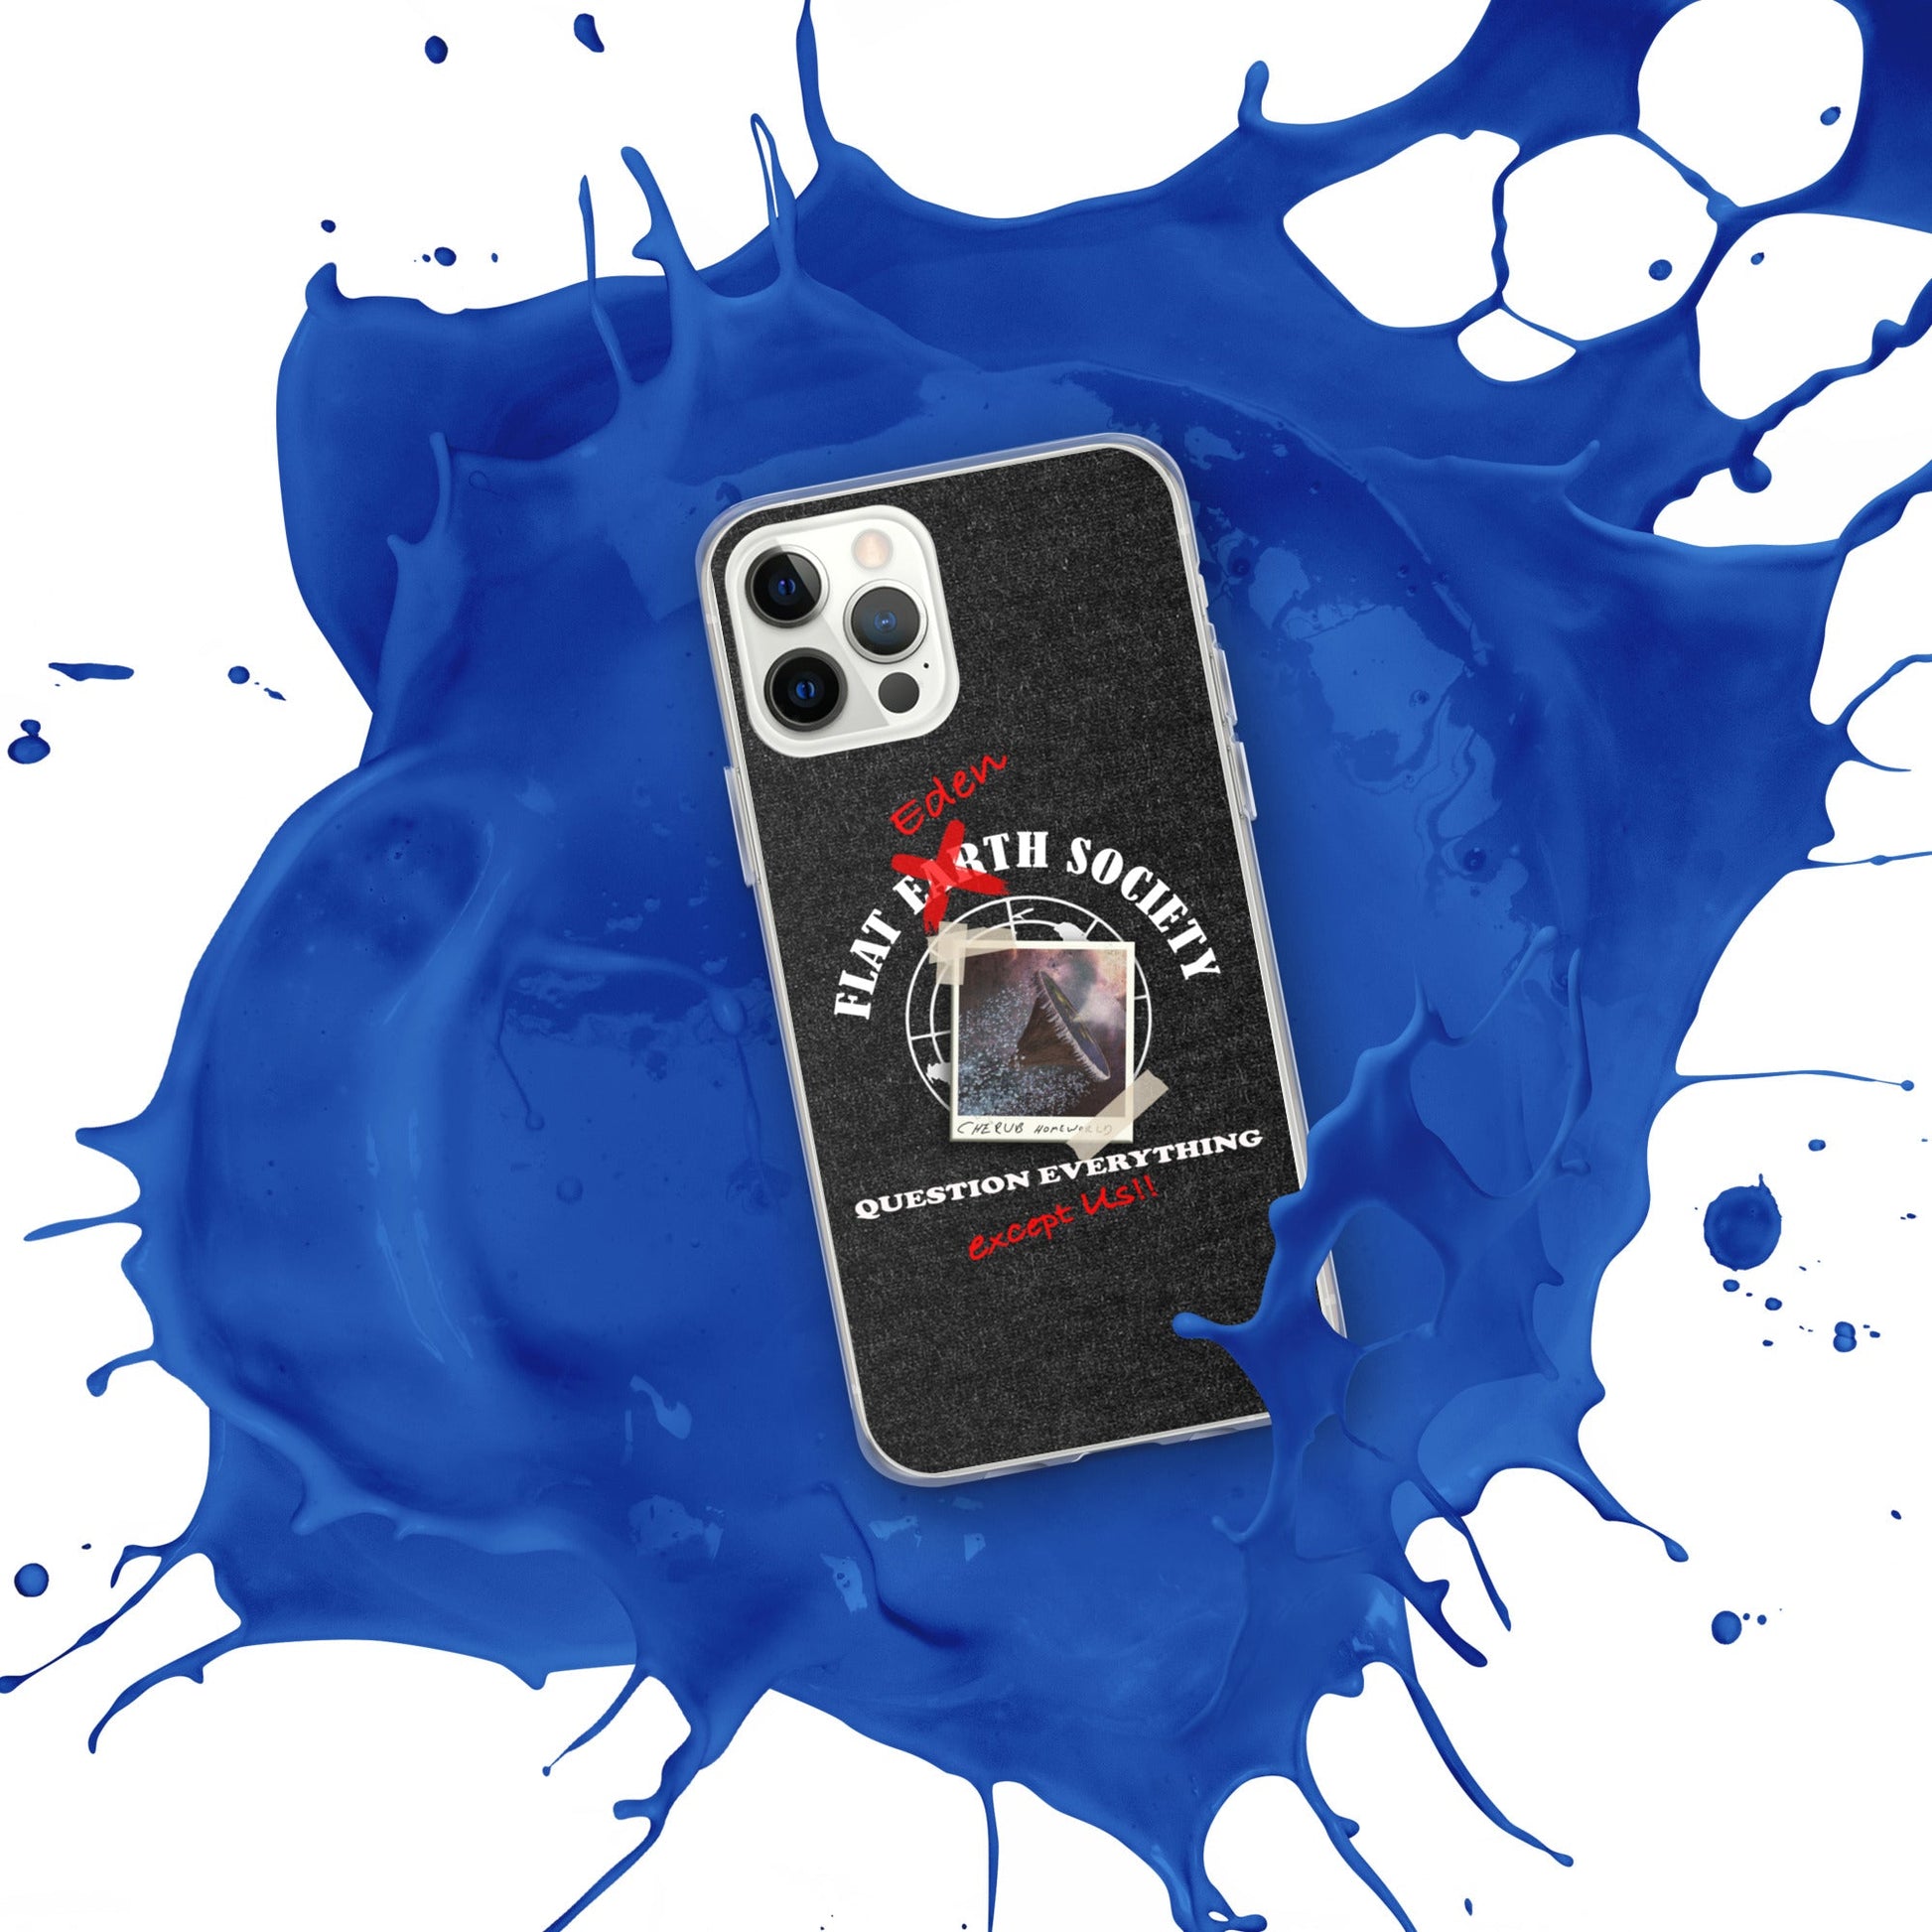 iPhone Case | Intergalactic Space Force 2 | Flat Eden Society - Spectral Ink Shop - Mobile Phone Cases -9780728_11808